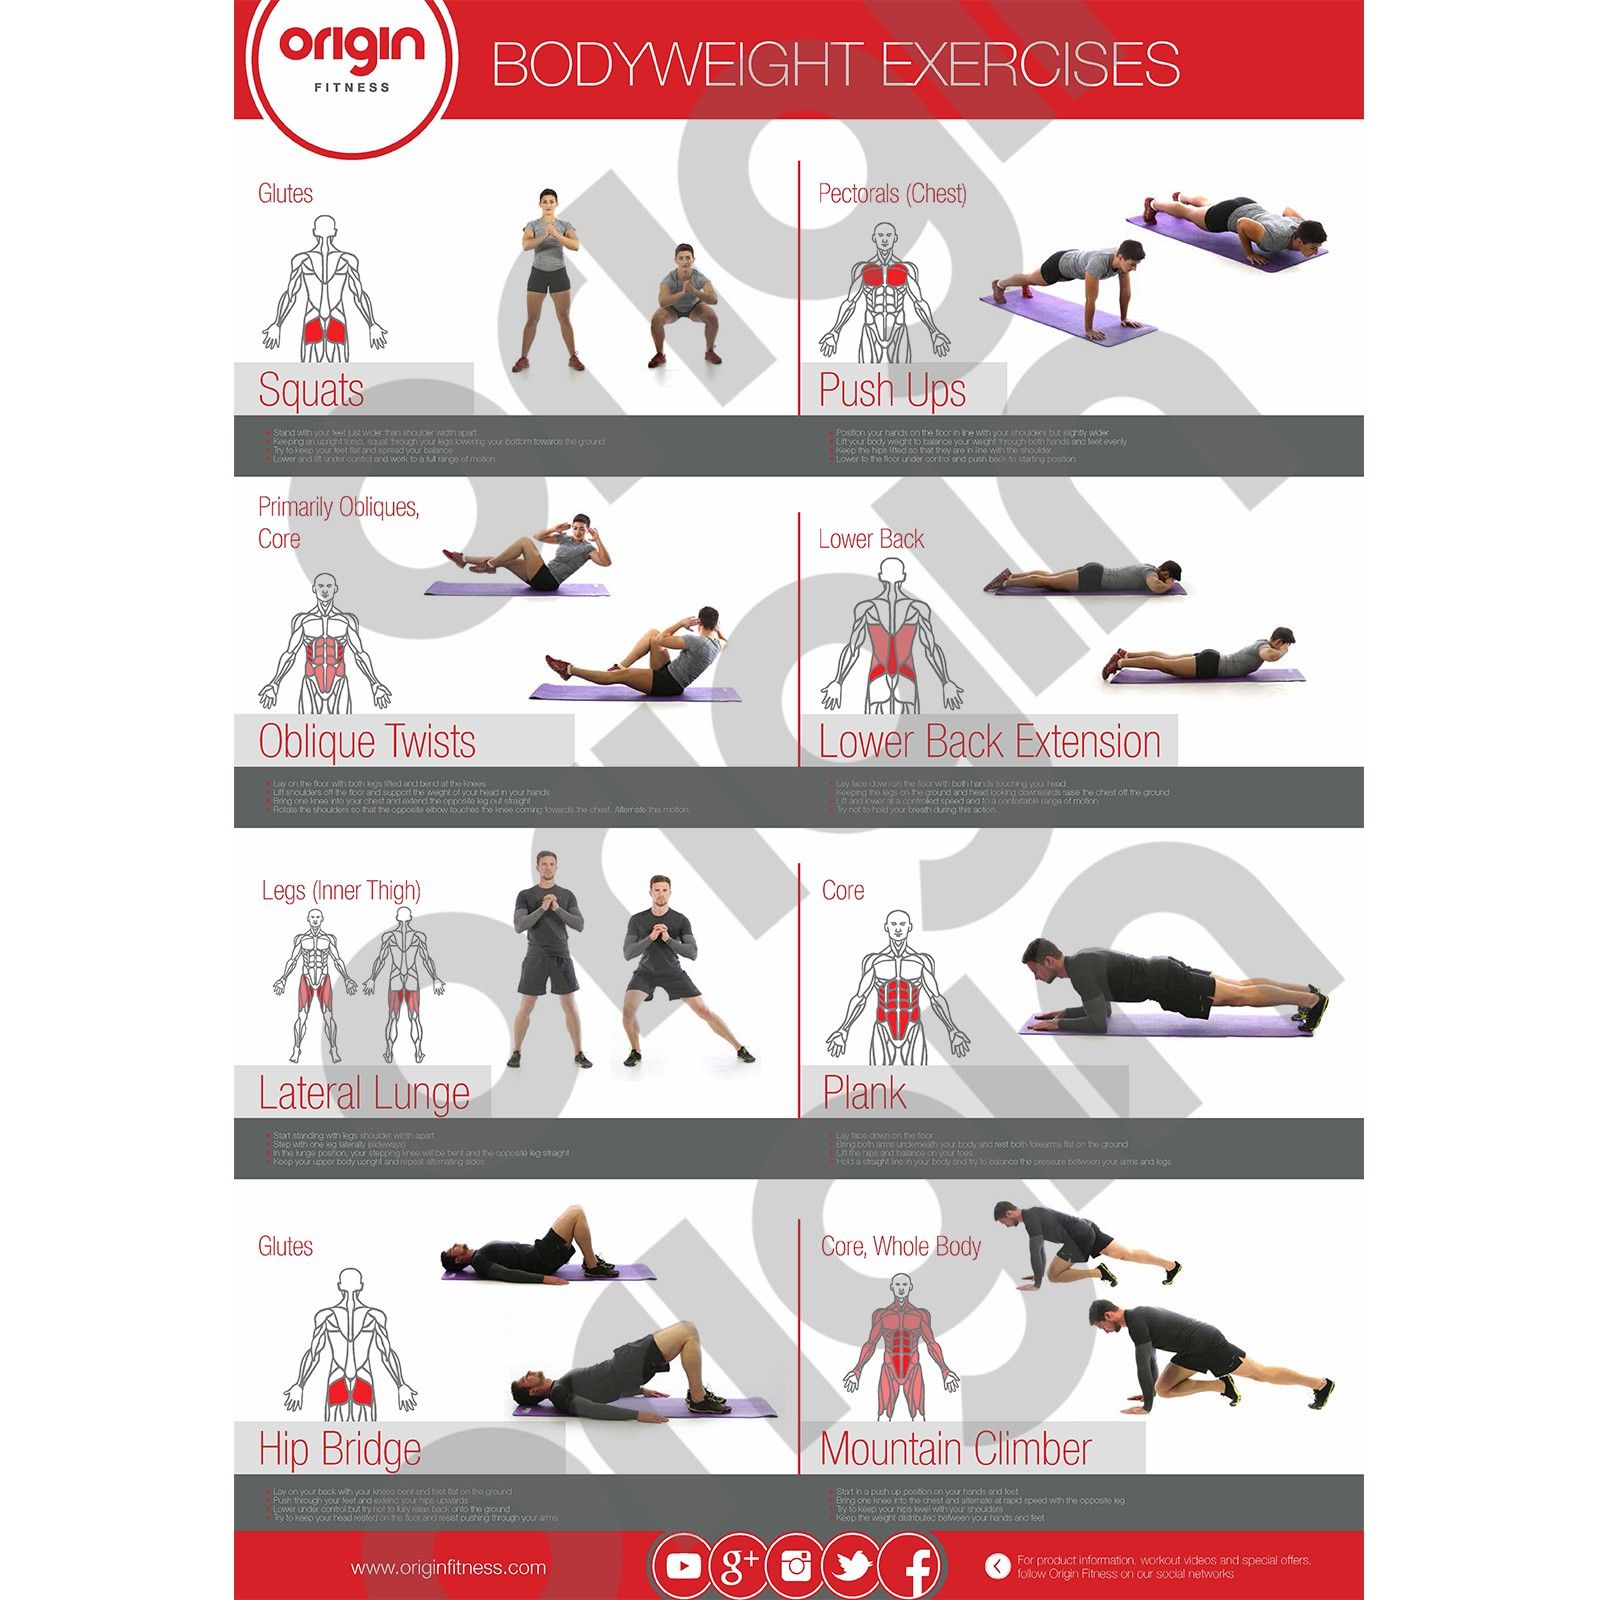 Chest Exercise | Full Chest Workout | Improves Strength Training |  Laminated Gym and Home Poster with Online Video Training Support | Size -  841mm x